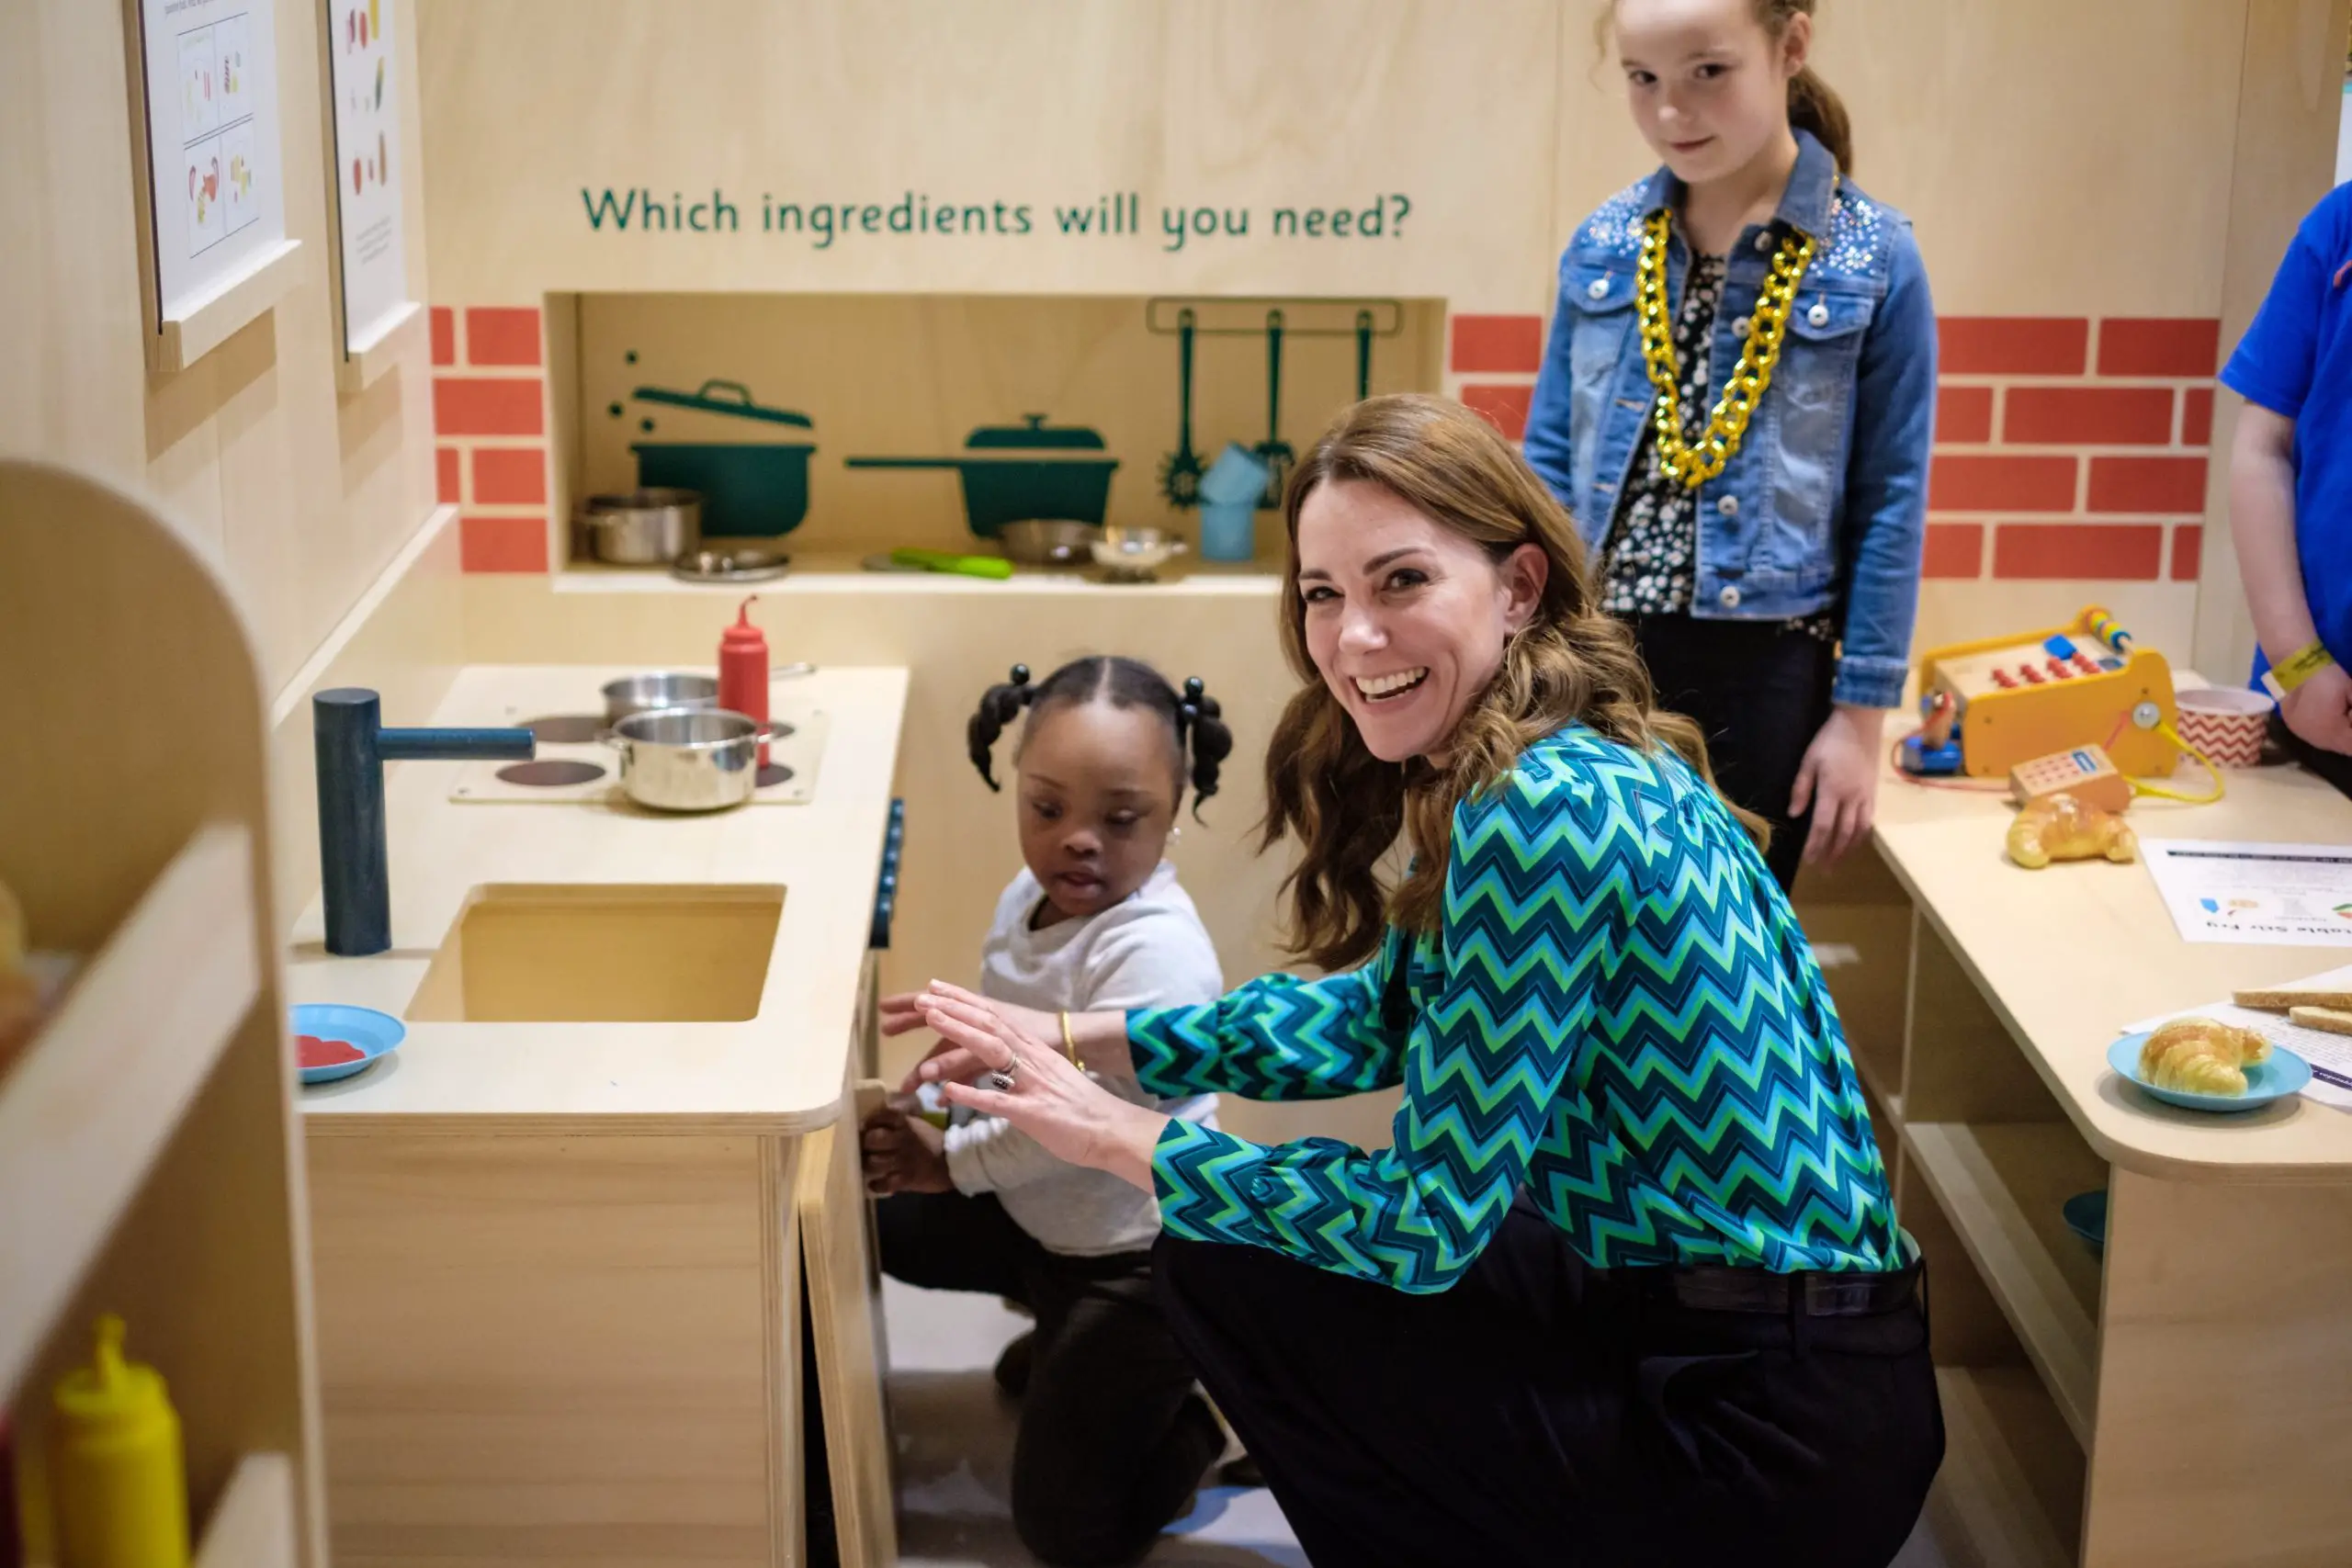 Duchess of Cambridge launched 5 Big Questions under her Early Years Intervention Project